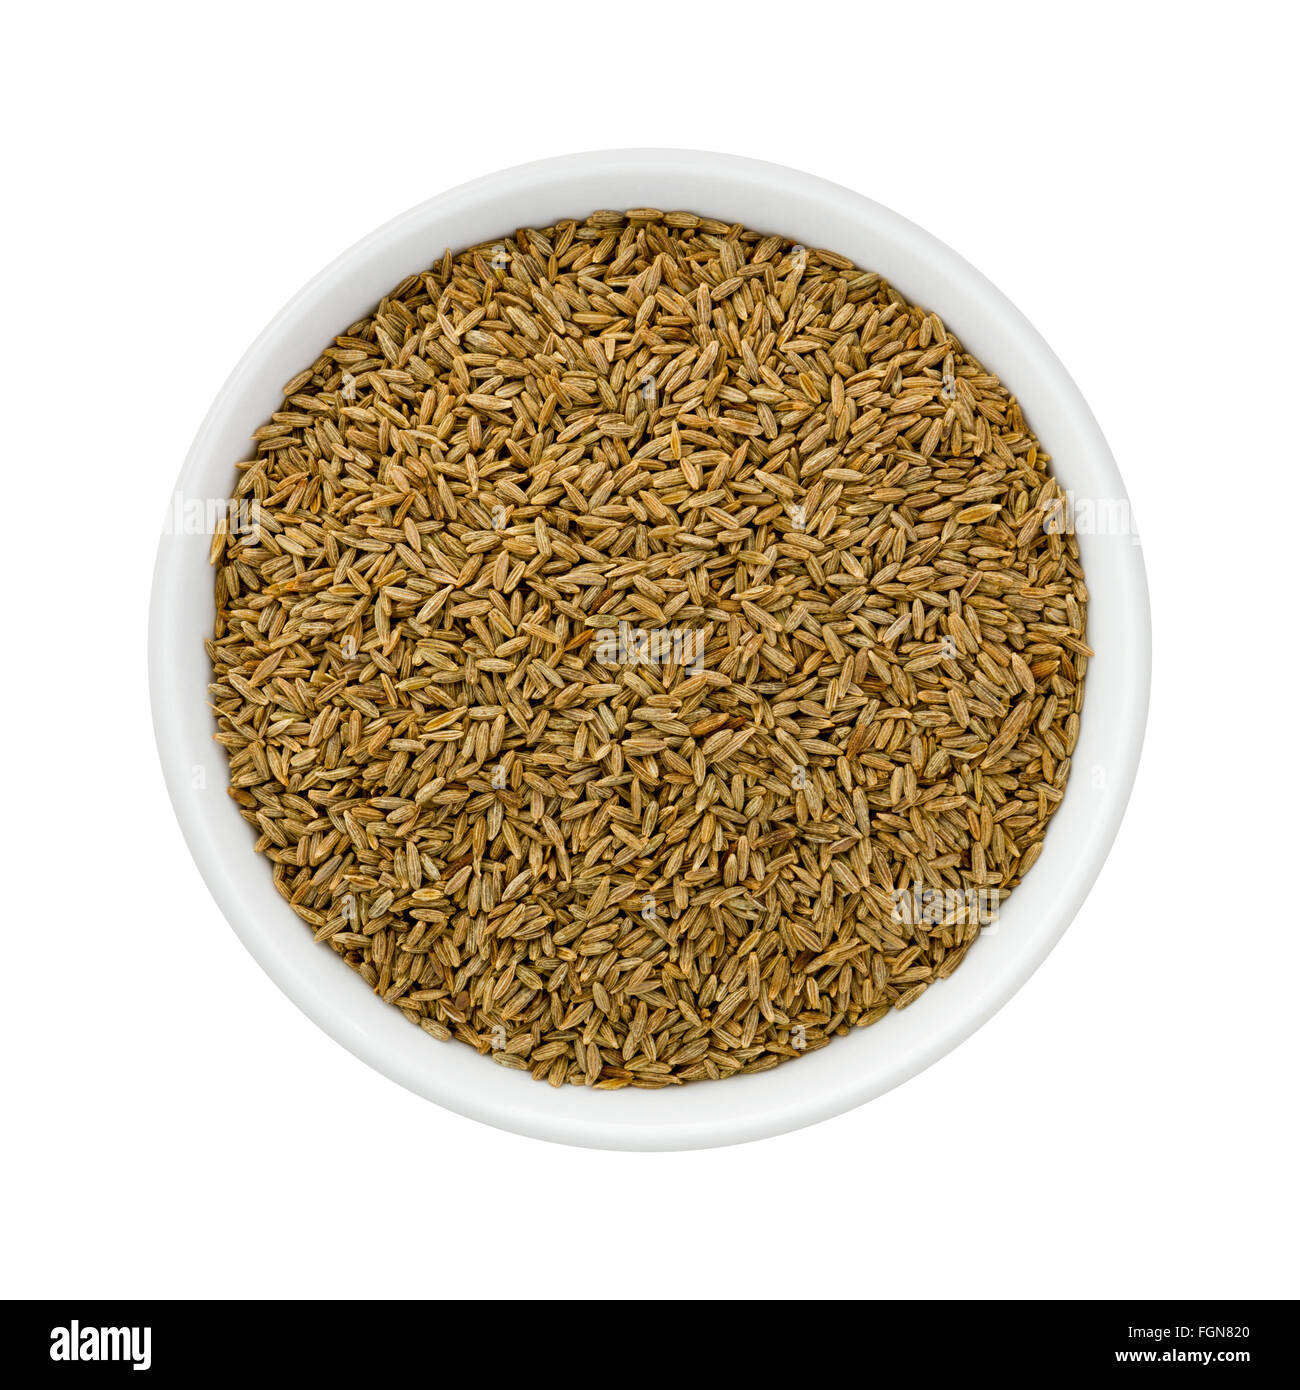 Cumin Seed in a Ceramic Bowl. The image is a cut out, isolated on a white background. Stock Photo